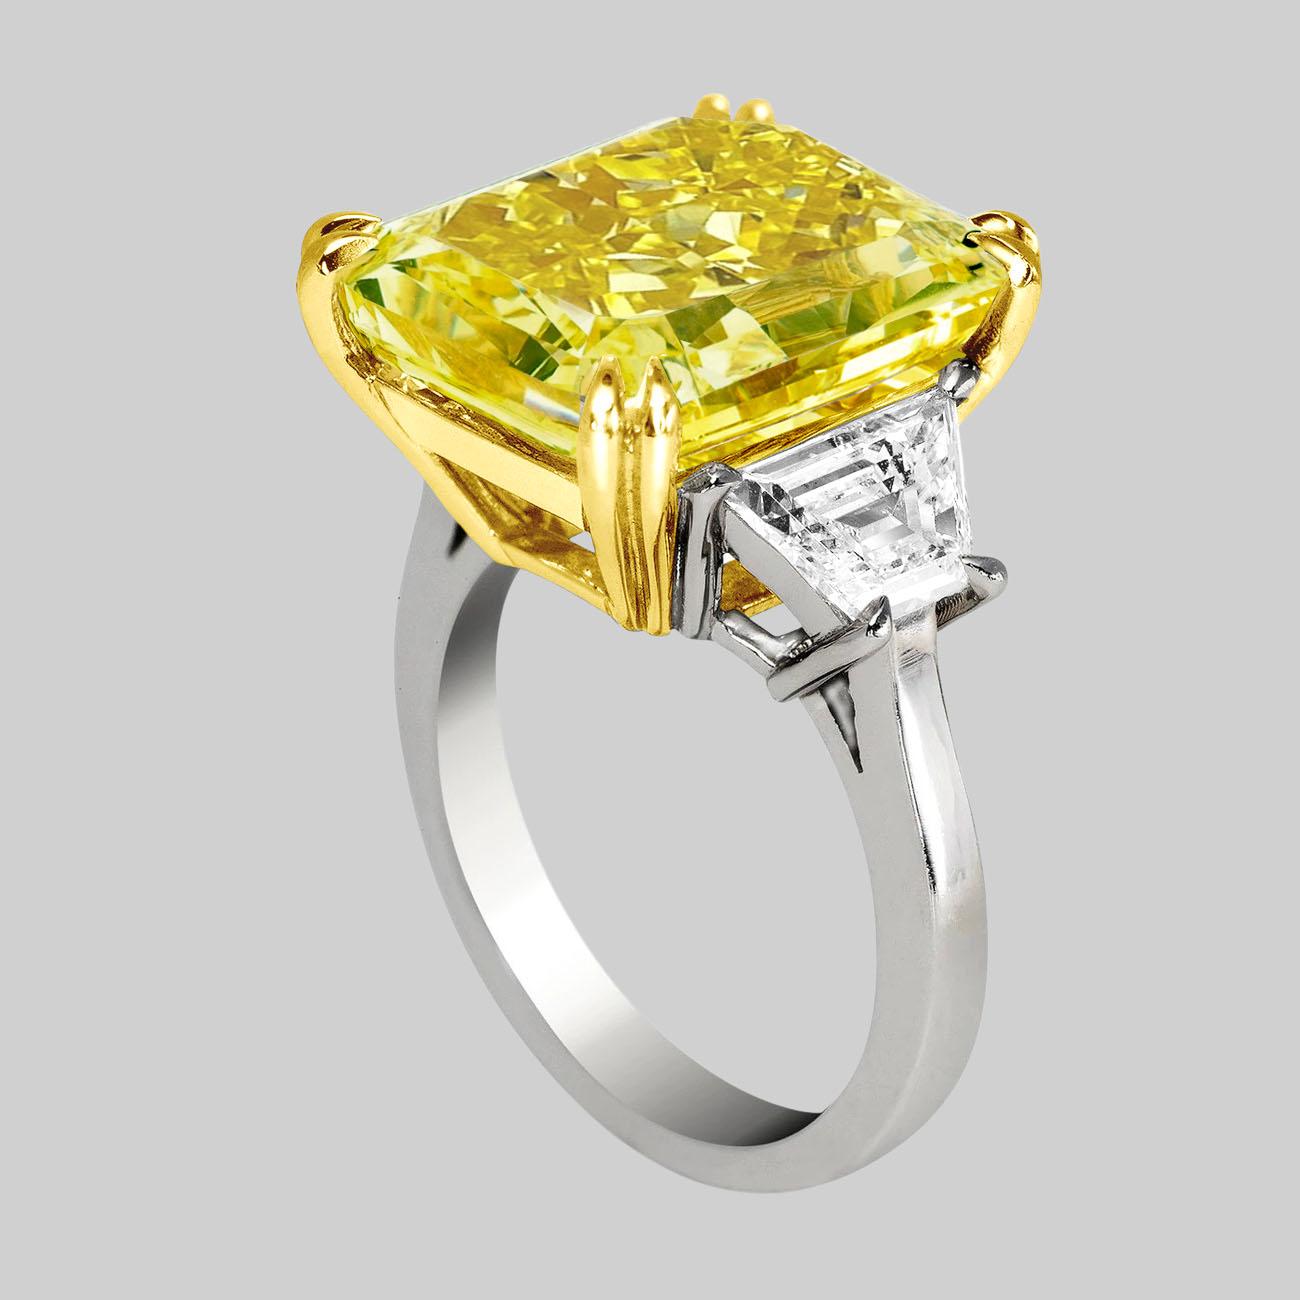 Cushion Cut EXCEPTIONAL GIA Certified 23 Carat Fancy VIVID Yellow Diamond Ring For Sale